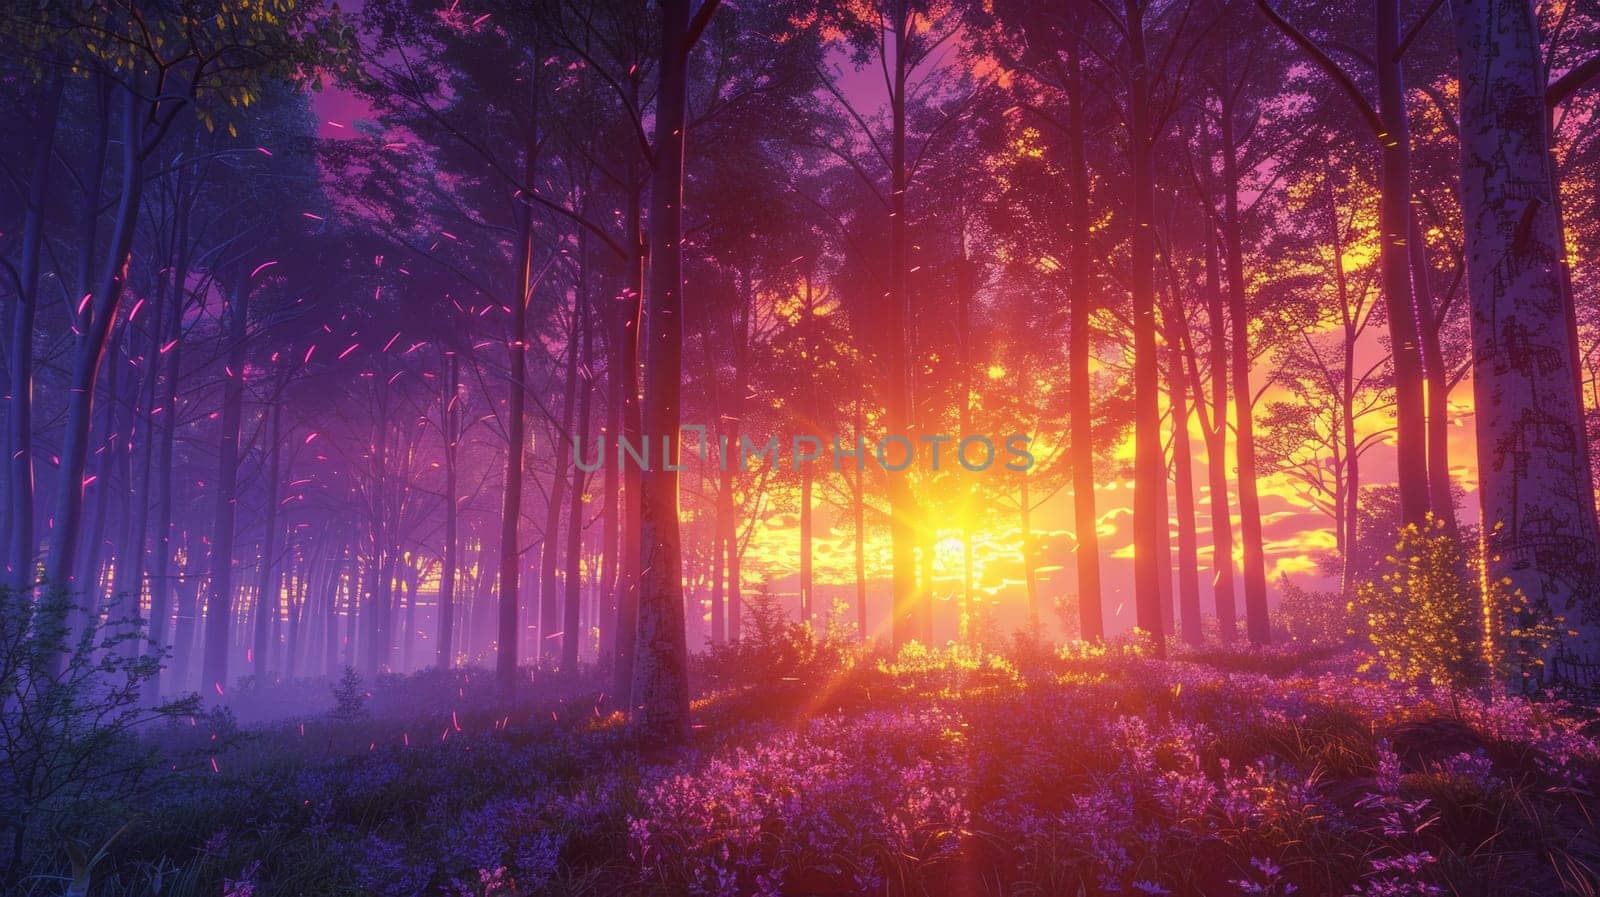 A forest with purple flowers and a sunset in the background